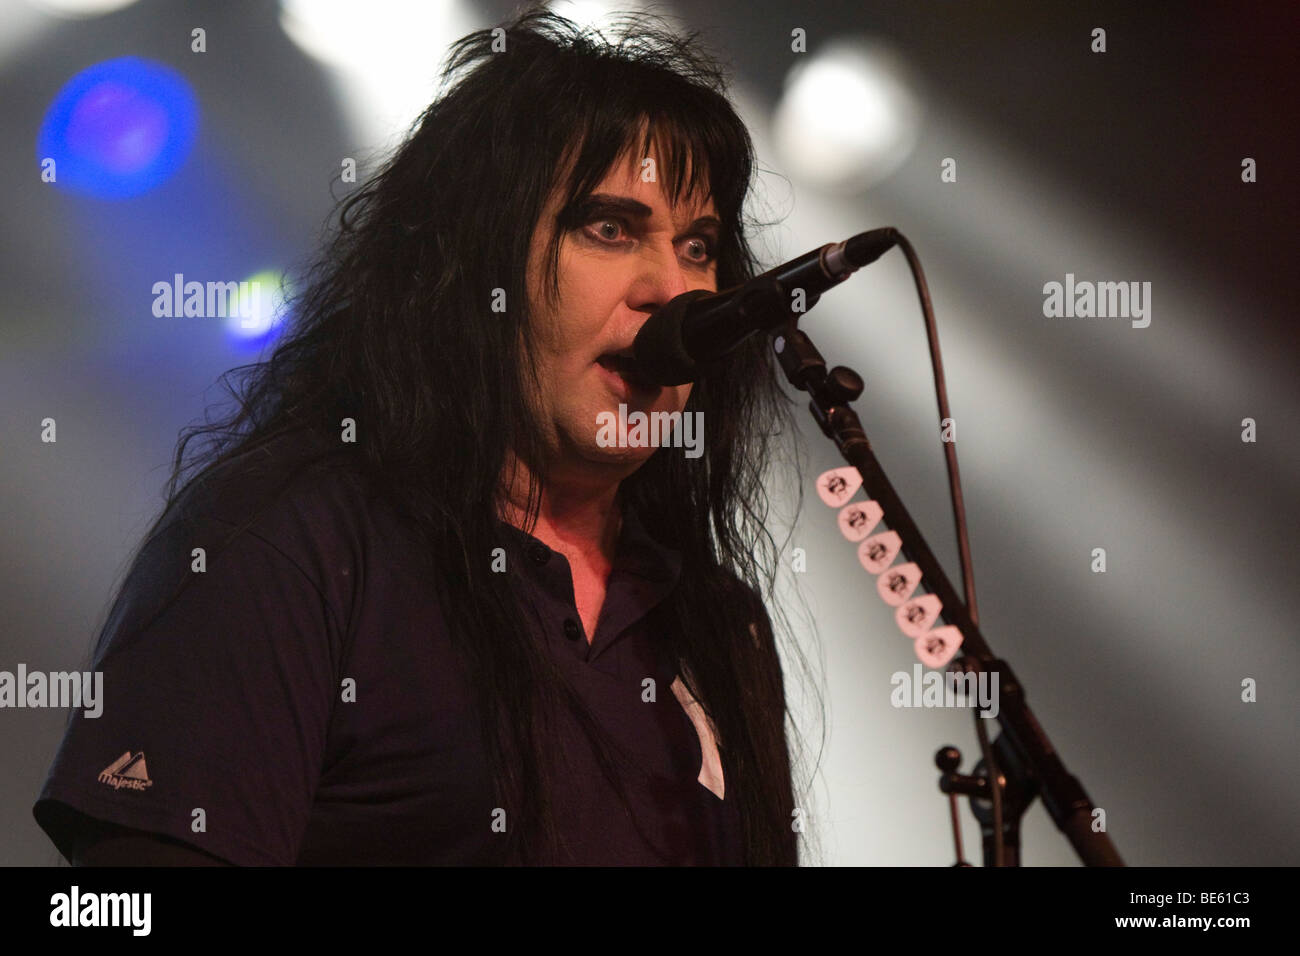 Blackie Lawless, singer and frontman of U.S. metal-rock band W.A.S.P. live in Schueuer, Lucerne, Switzerland Stock Photo